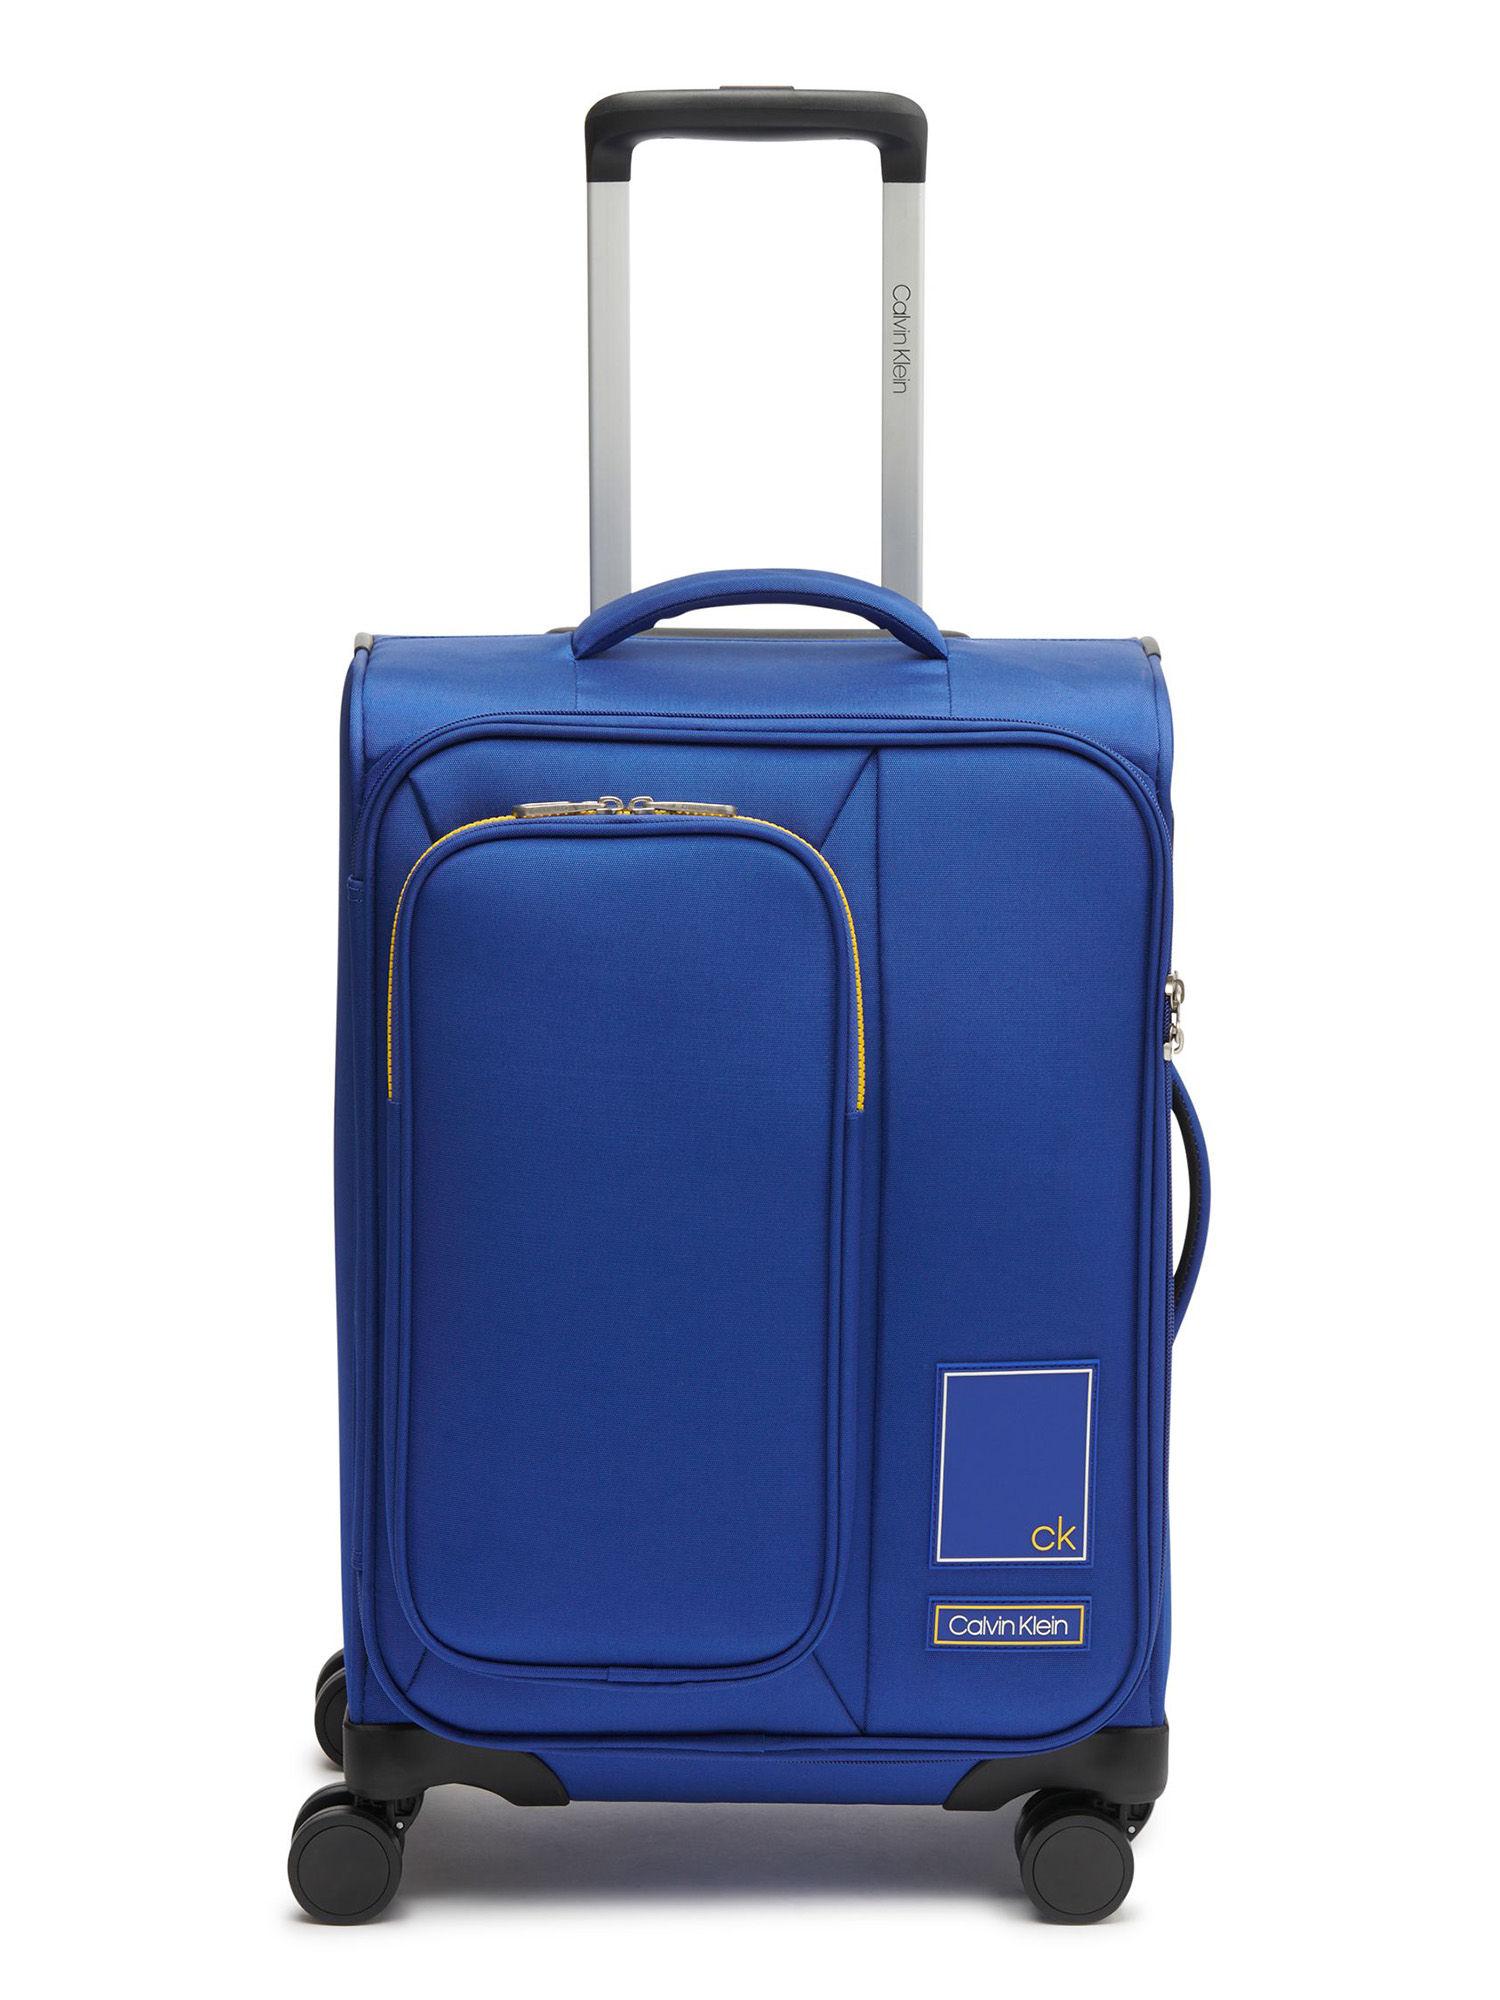 scuba blue color polyester material soft 20" cabin size trolley